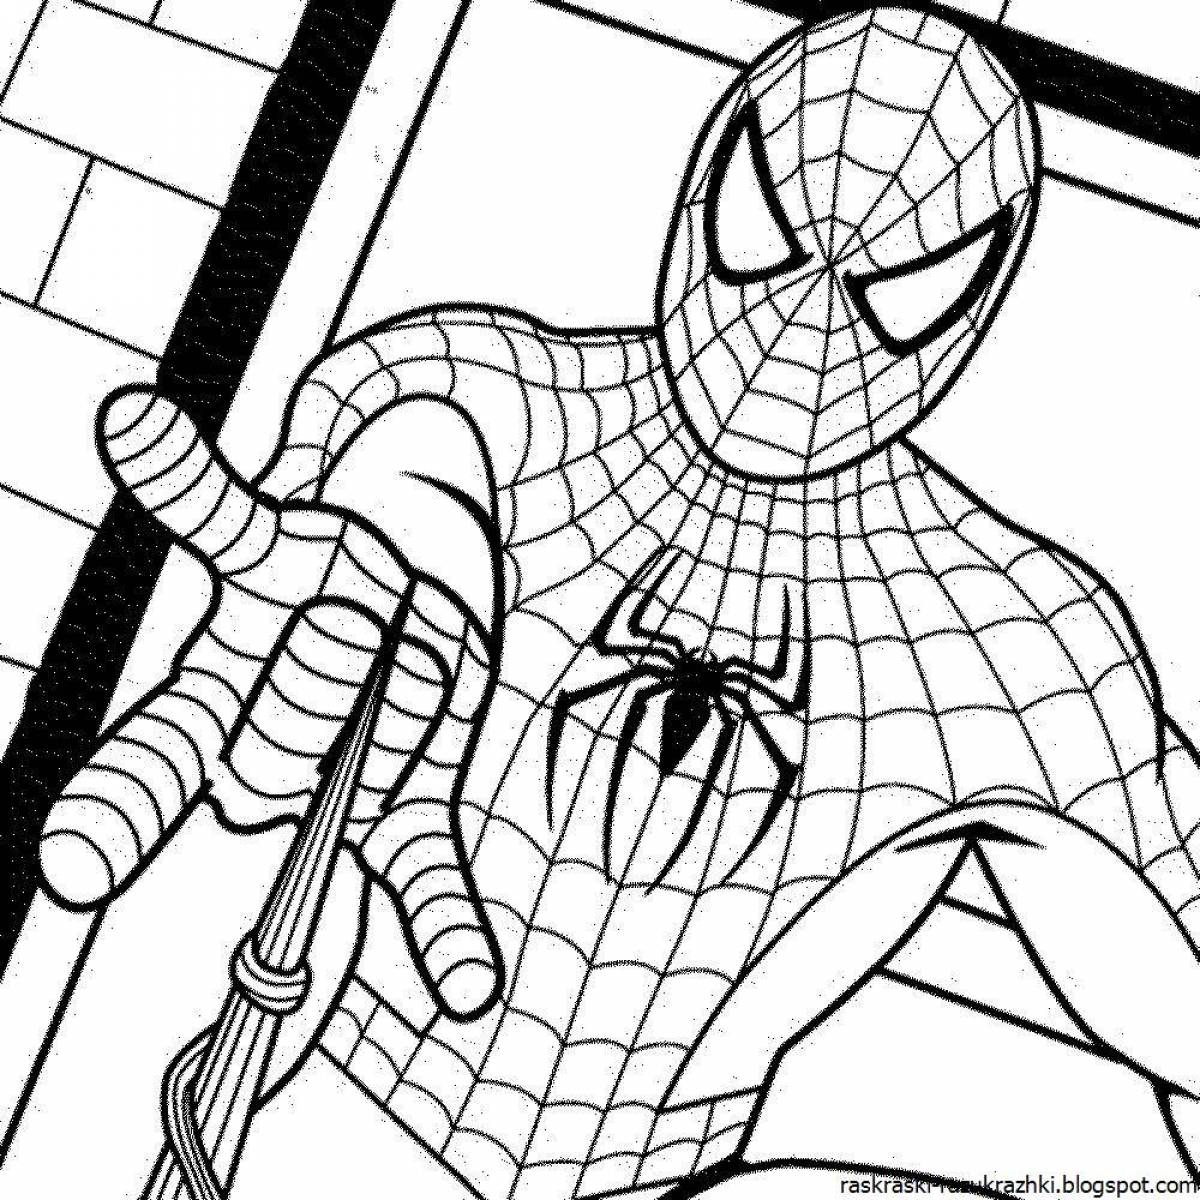 Spiderman glowing coloring page